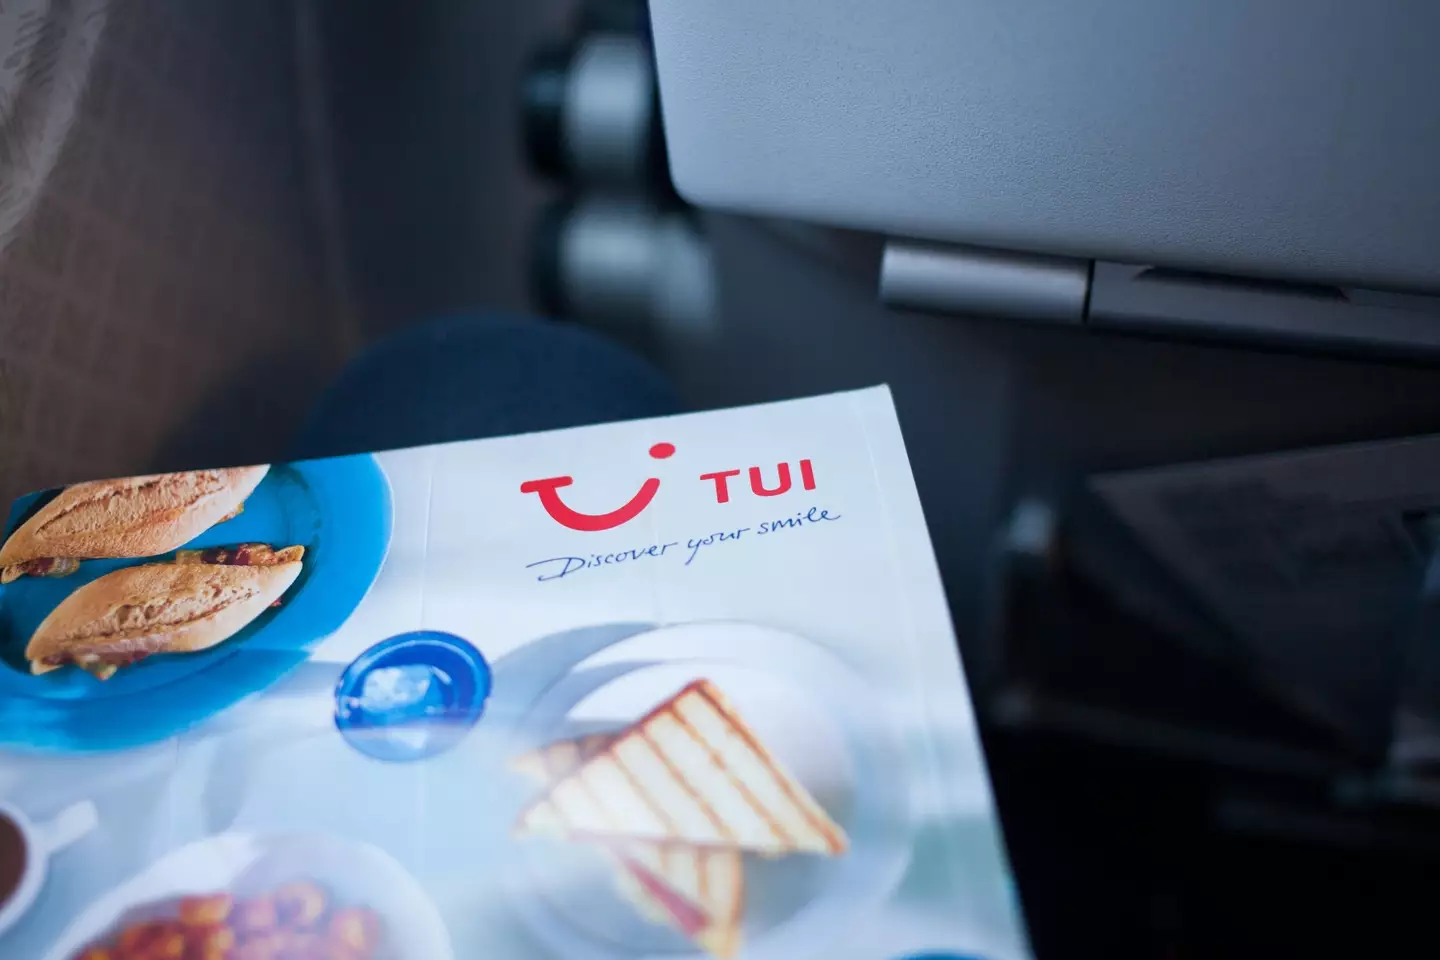 Food services ion TUI flights have been affected by staff shortages.